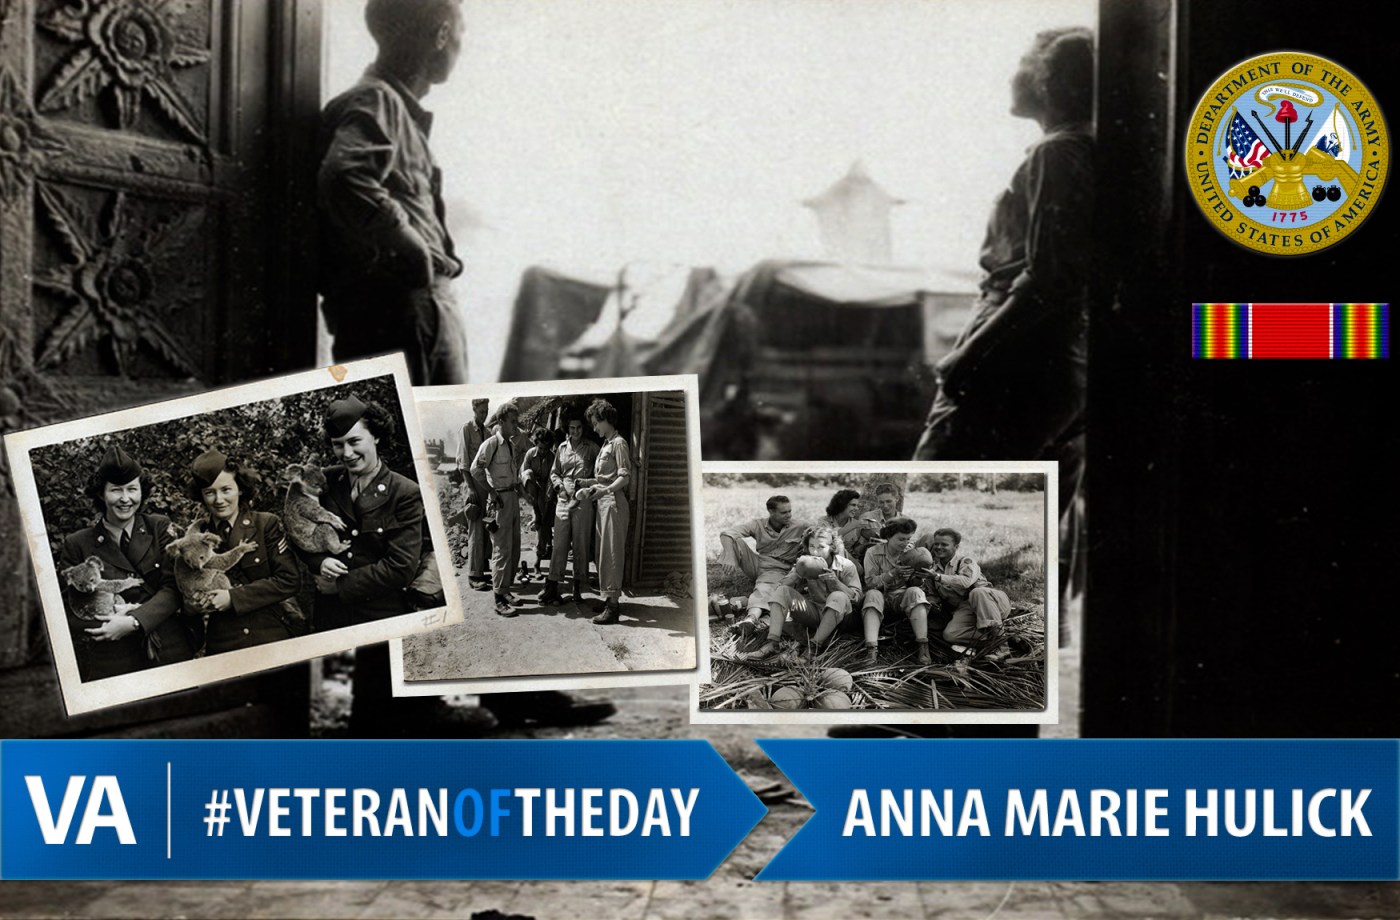 Anna Marie Hulick - Veteran of the Day